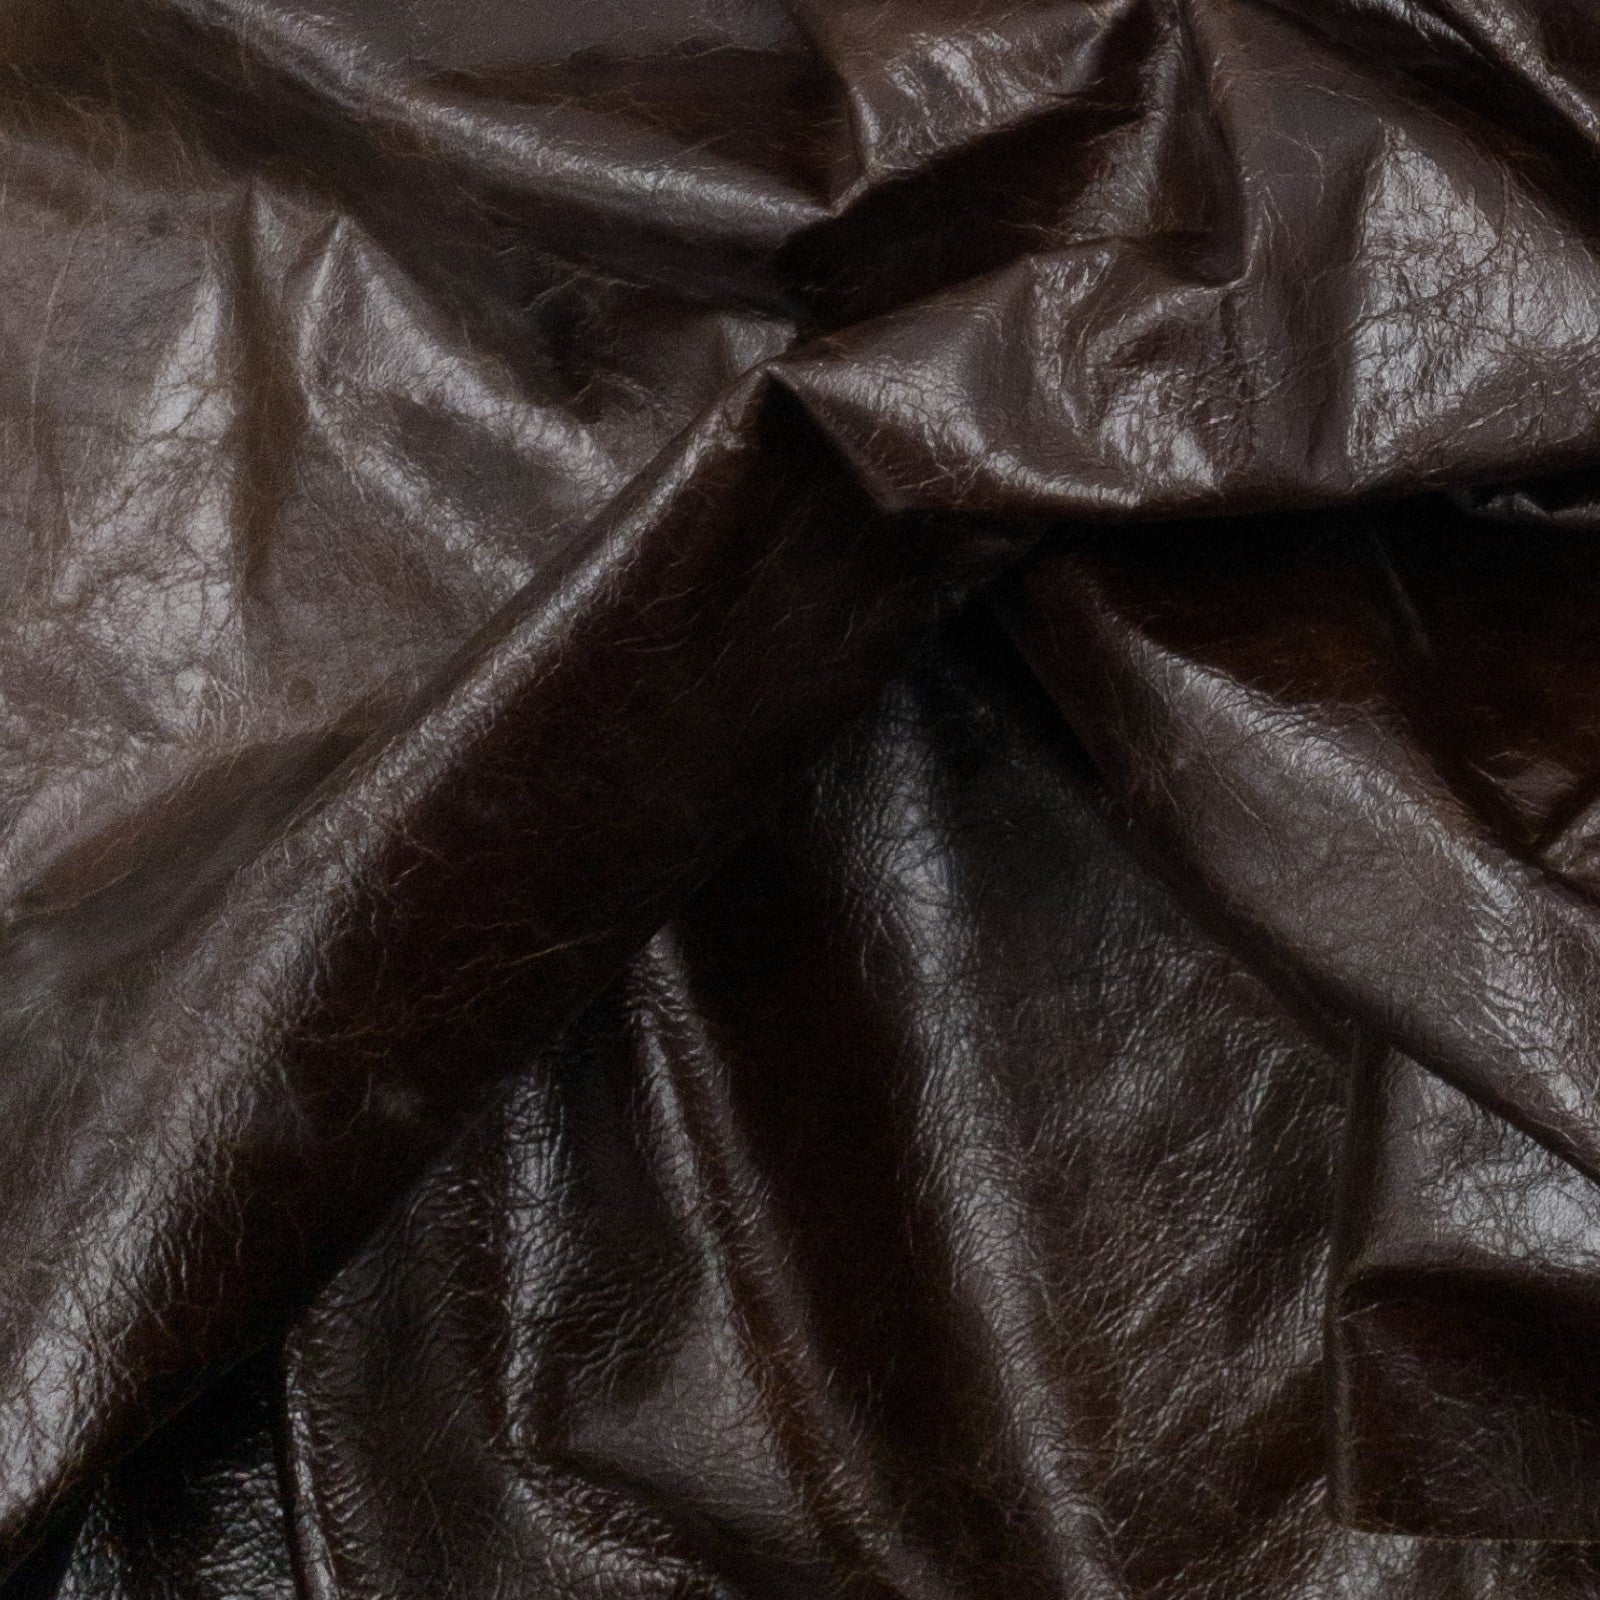 Dark Brown, 2-4 oz, 3-10 Sq Ft, Upholstery Cow Project Pieces, Dark Brown 8 (2-3oz) / 7-10 Sq Ft | The Leather Guy